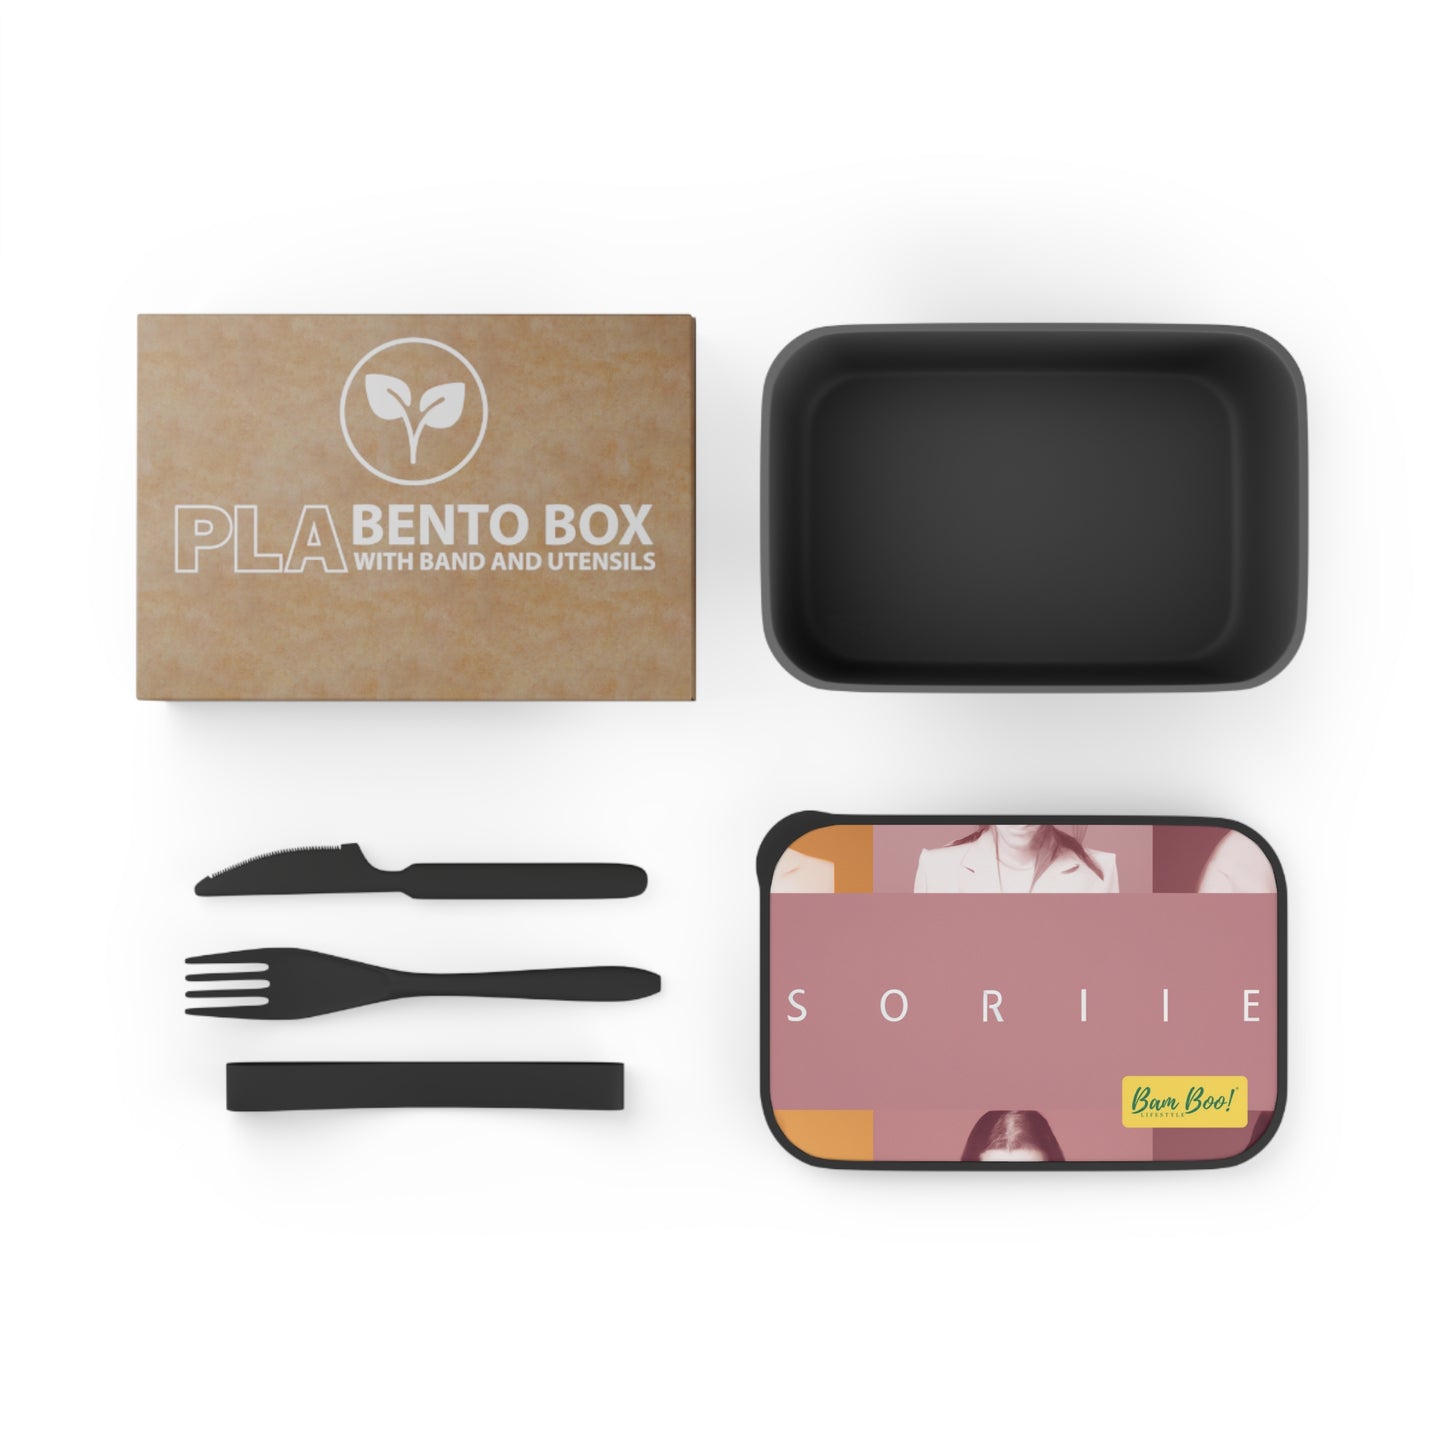 "My One-of-a-Kind Expression: A Collage of Me" - Bam Boo! Lifestyle Eco-friendly PLA Bento Box with Band and Utensils